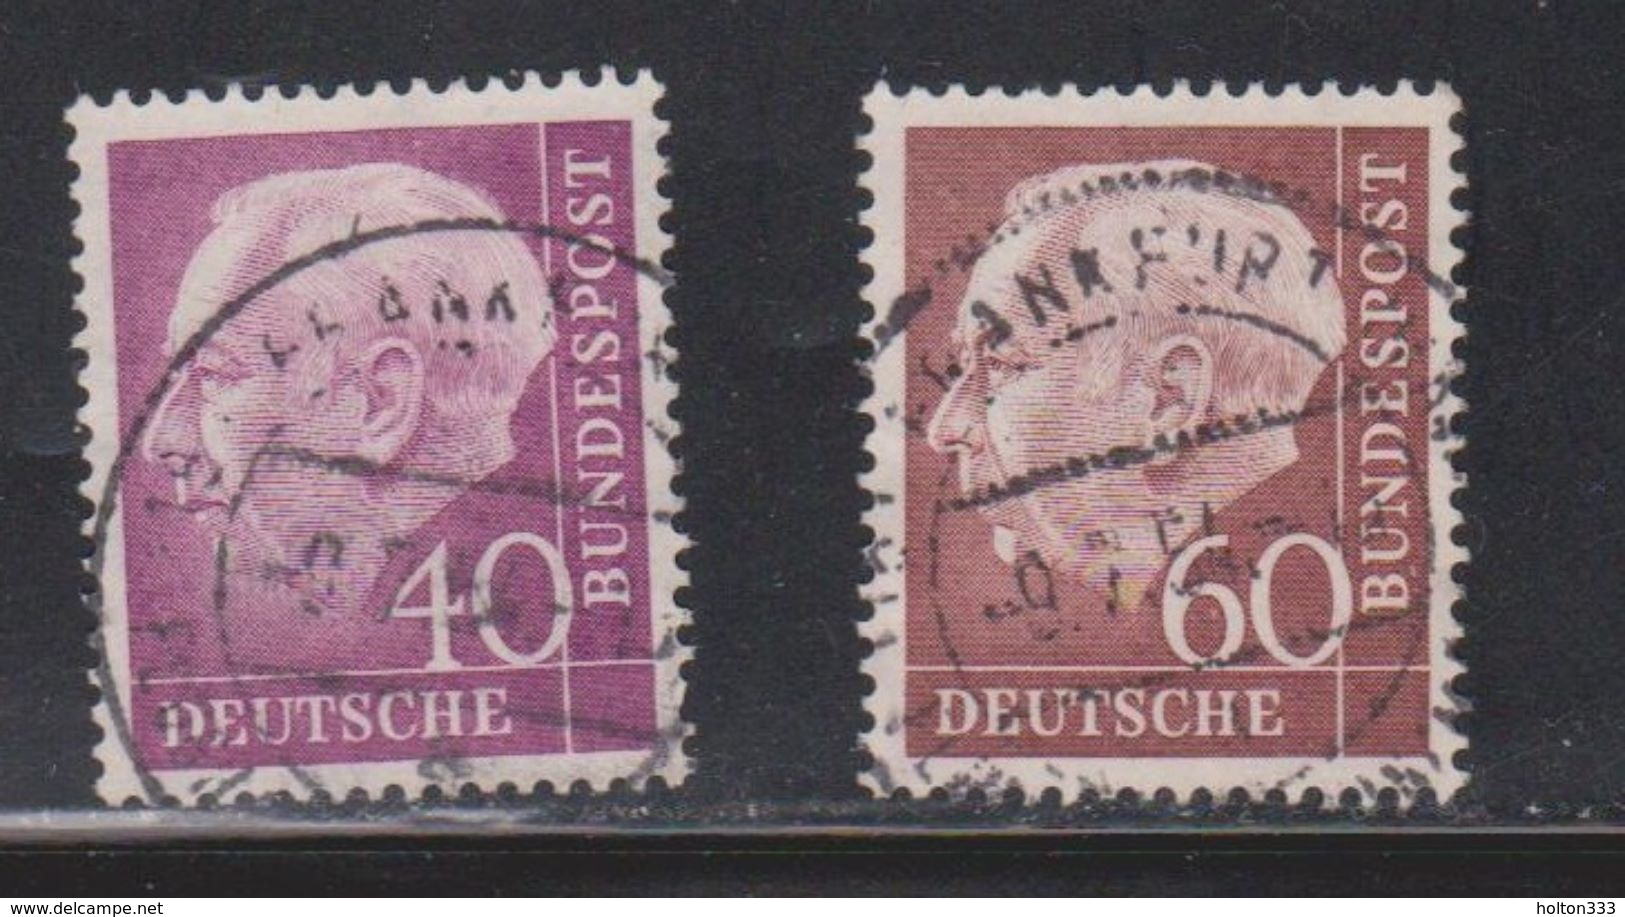 GERMANY Scott # 713, 715 Used - President Theodore Heuss - Used Stamps